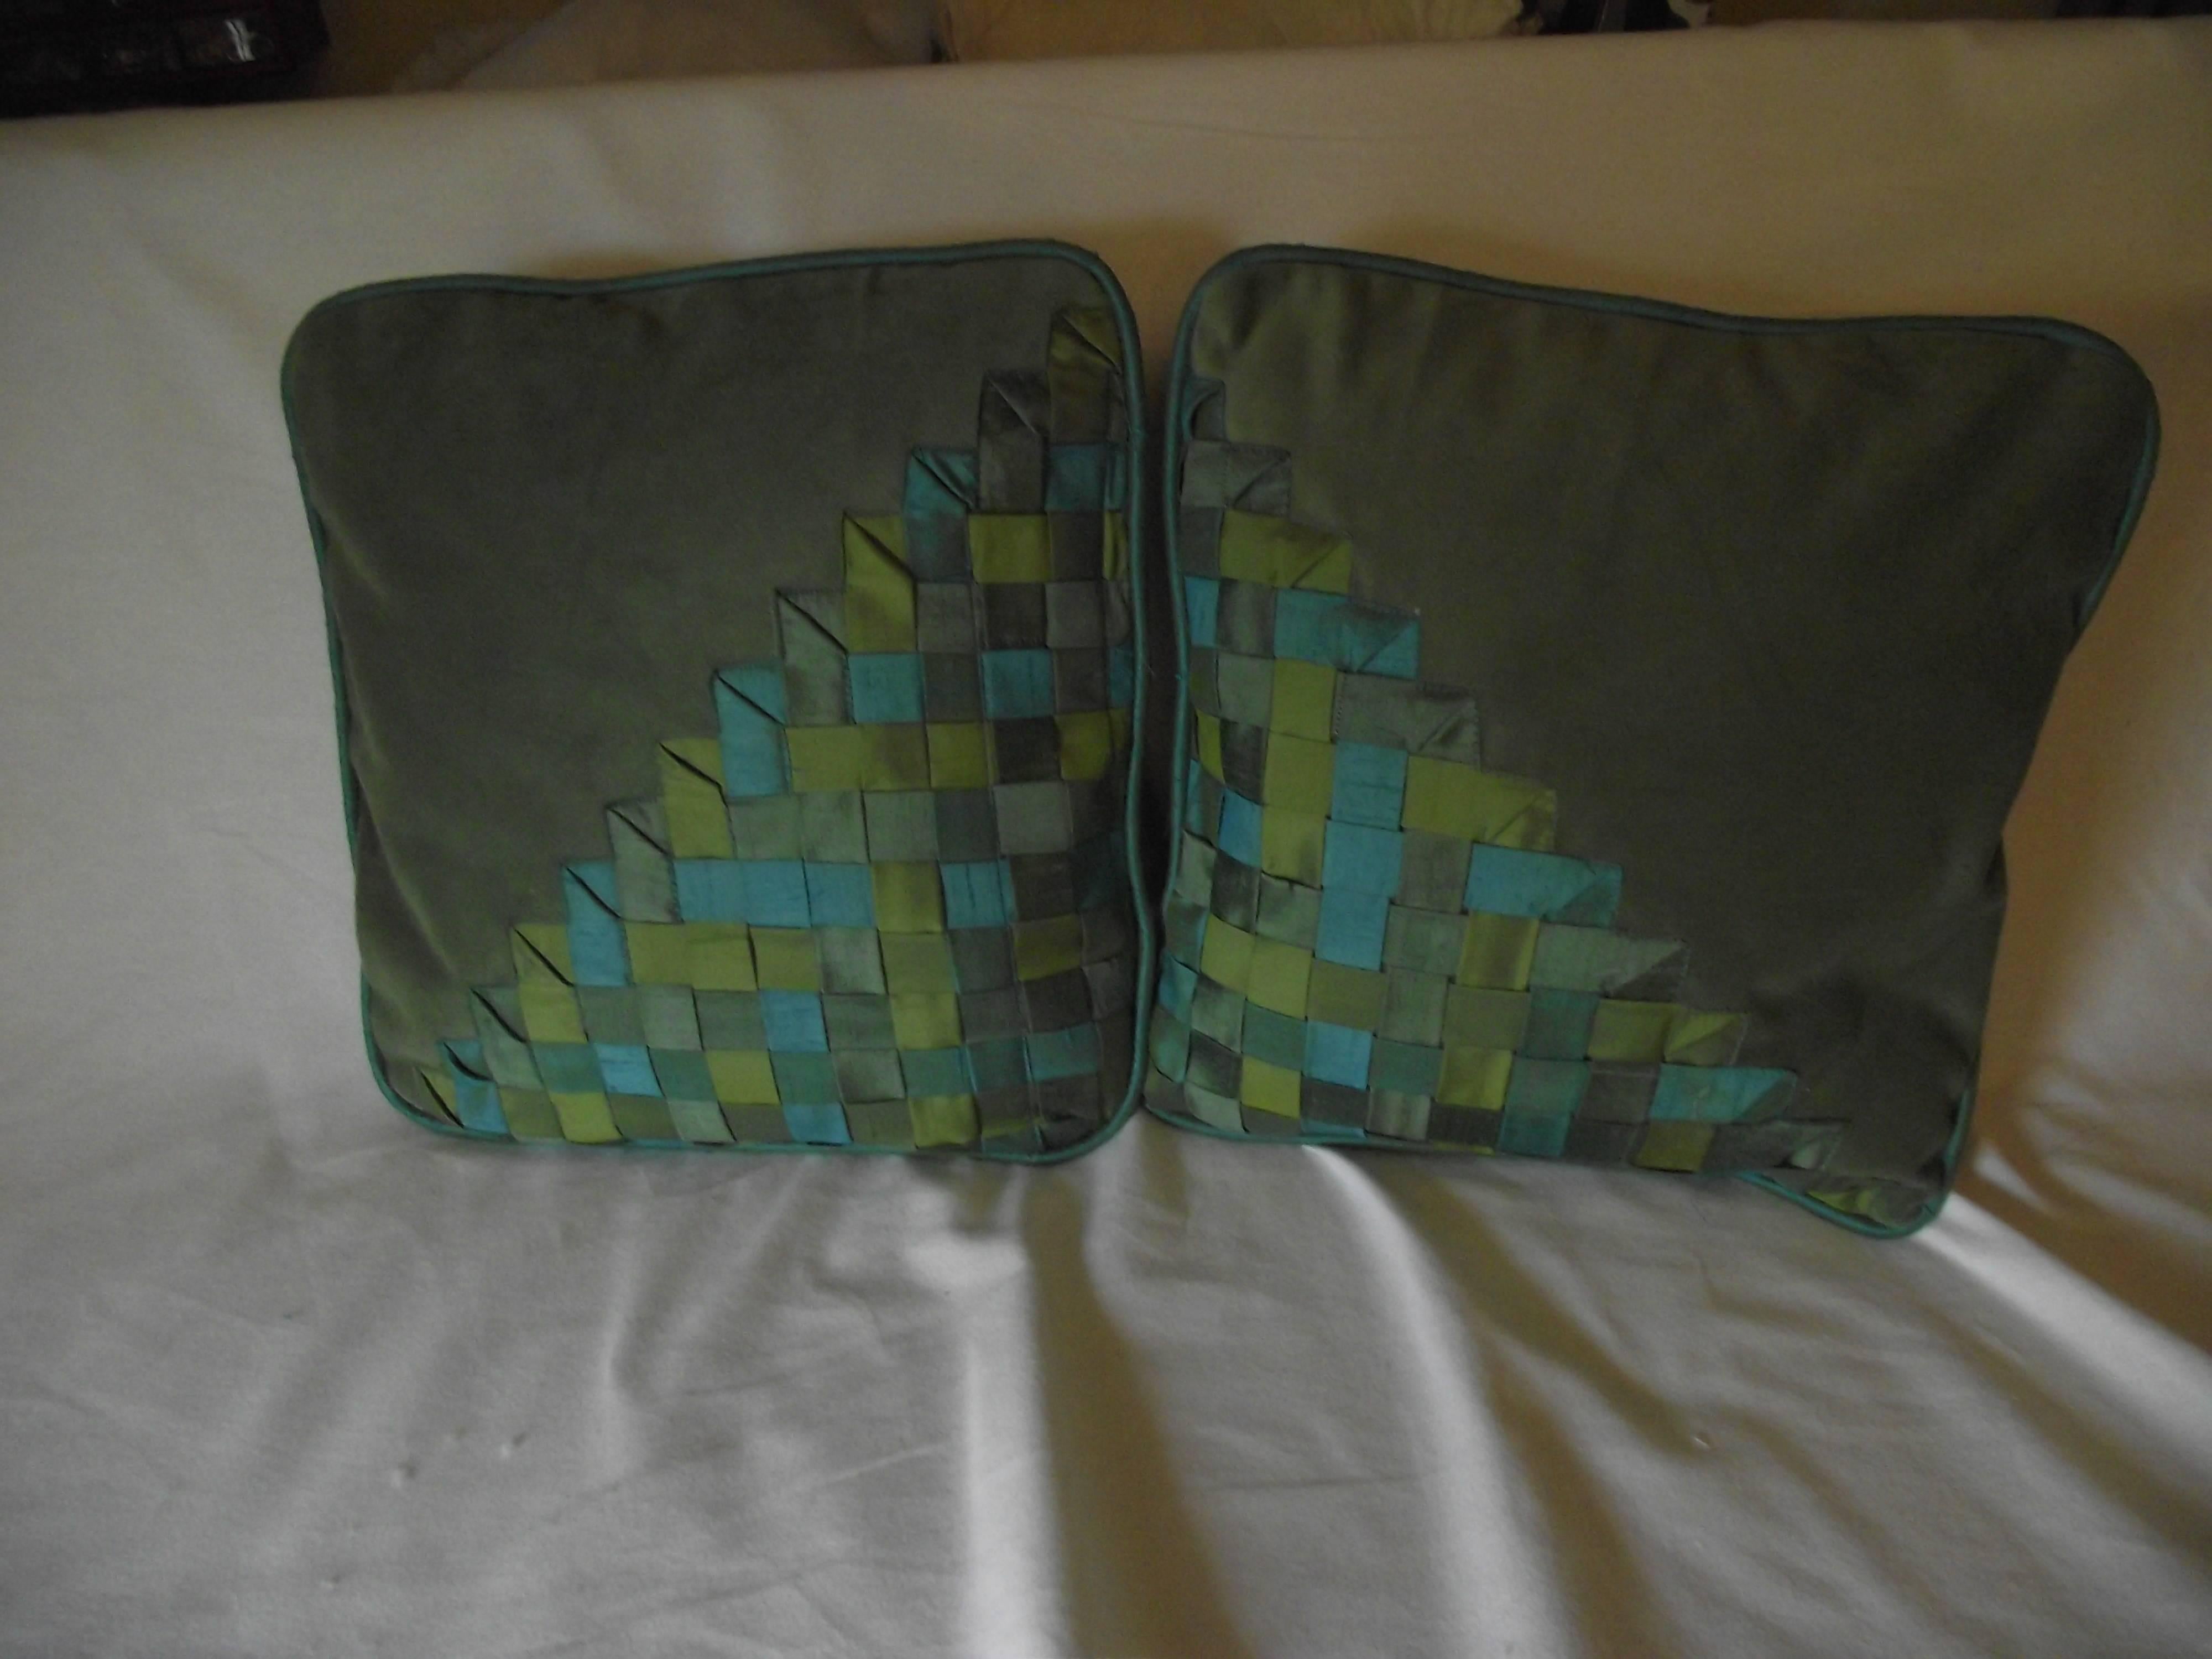 Great pair of asymmetric geometric designed pillows. They are an original design from Gantt Design Studio. The mirror image designs are created weaving three shades of green silk on a light green velvet fabric. The pillows are on soft hyper